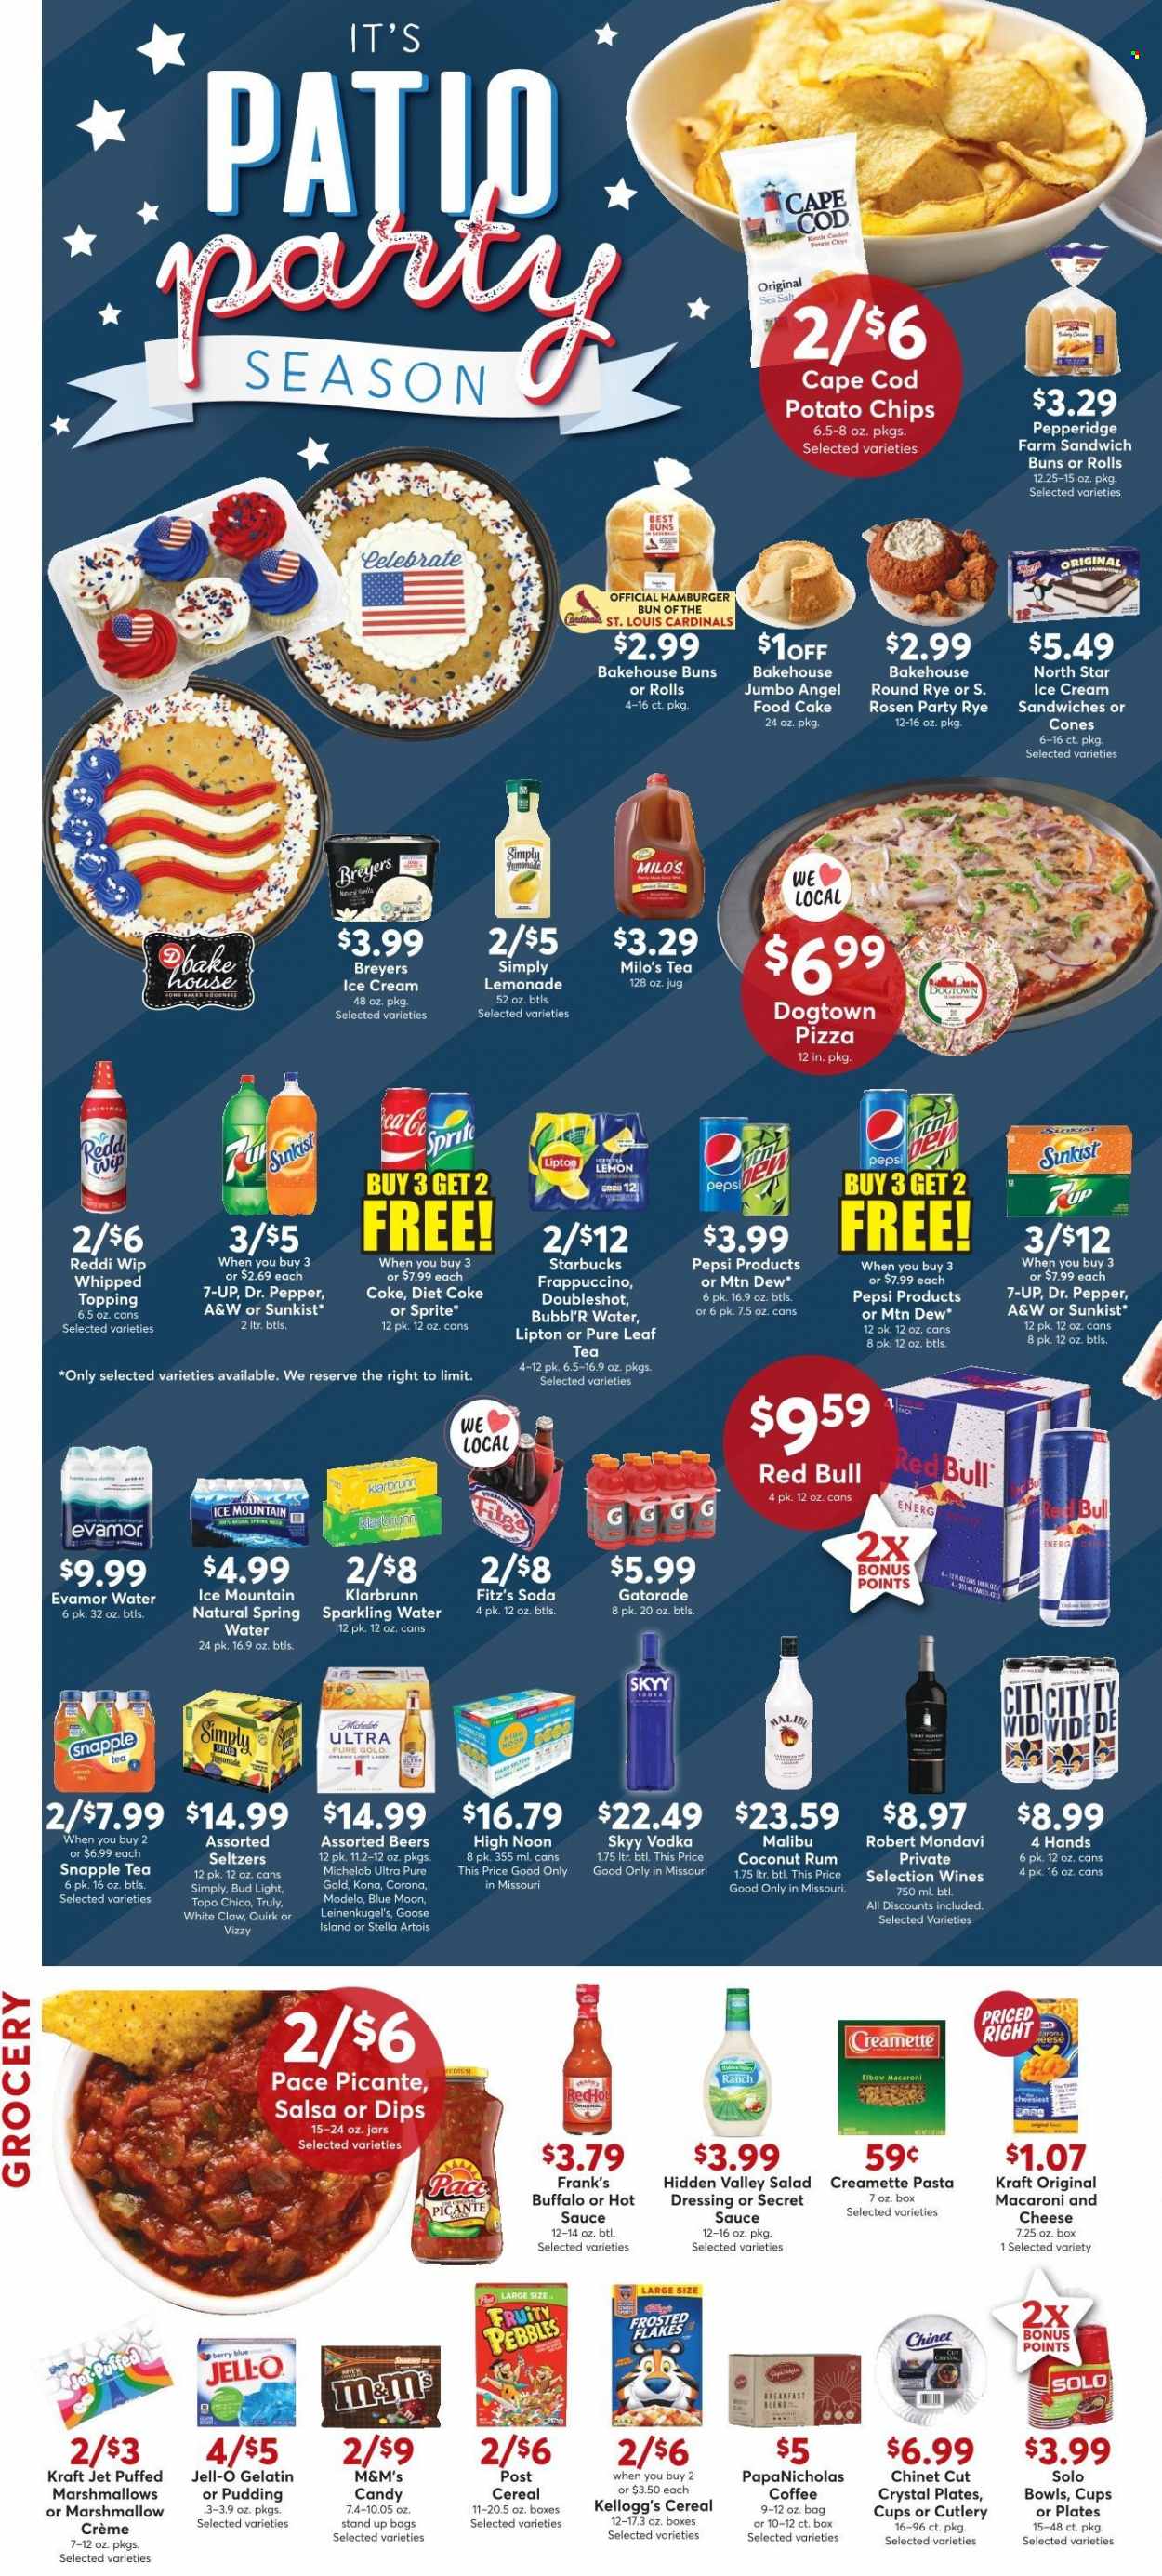 thumbnail - Dierbergs Flyer - 05/23/2023 - 05/29/2023 - Sales products - cake, buns, burger buns, Angel Food, macaroni & cheese, pizza, pasta, sauce, Kraft®, pudding, ice cream, ice cream sandwich, M&M's, Kellogg's, Candy, potato chips, chips, topping, Jell-O, cereals, Frosted Flakes, Fruity Pebbles, Creamette, salad dressing, hot sauce, dressing, salsa, Coca-Cola, lemonade, Mountain Dew, Sprite, Pepsi, energy drink, Lipton, ice tea, Dr. Pepper, Diet Coke, soft drink, 7UP, Red Bull, Snapple, Milo's, A&W, Gatorade, Coke, spring water, soda, sparkling water, Ice Mountain, water, Pure Leaf, coffee, Starbucks, frappuccino, breakfast blend, rum, vodka, SKYY, Malibu, White Claw, TRULY, beer, Stella Artois, Bud Light, Corona Extra, Modelo, Topo Chico, electrolyte drink, Leinenkugel's, Blue Moon, Michelob. Page 2.